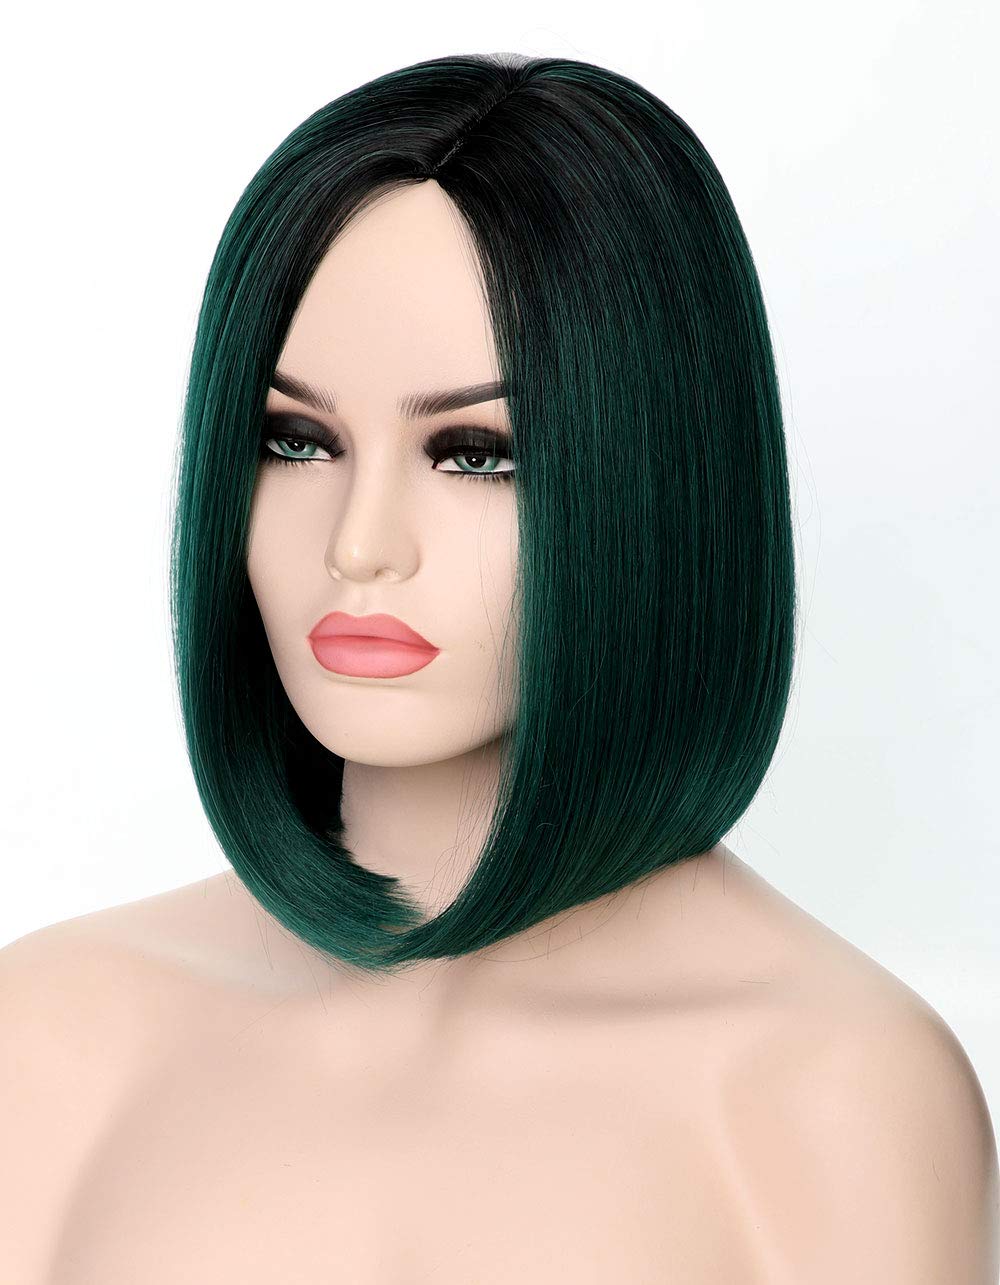 Price:$7.99     14'' Green Wig for Women Short Bob Wig Middle Part Synthetic Cosplay Party Wig Heat Resistant Full Wig, Average Size with Adjustable Elastic Band   Beauty